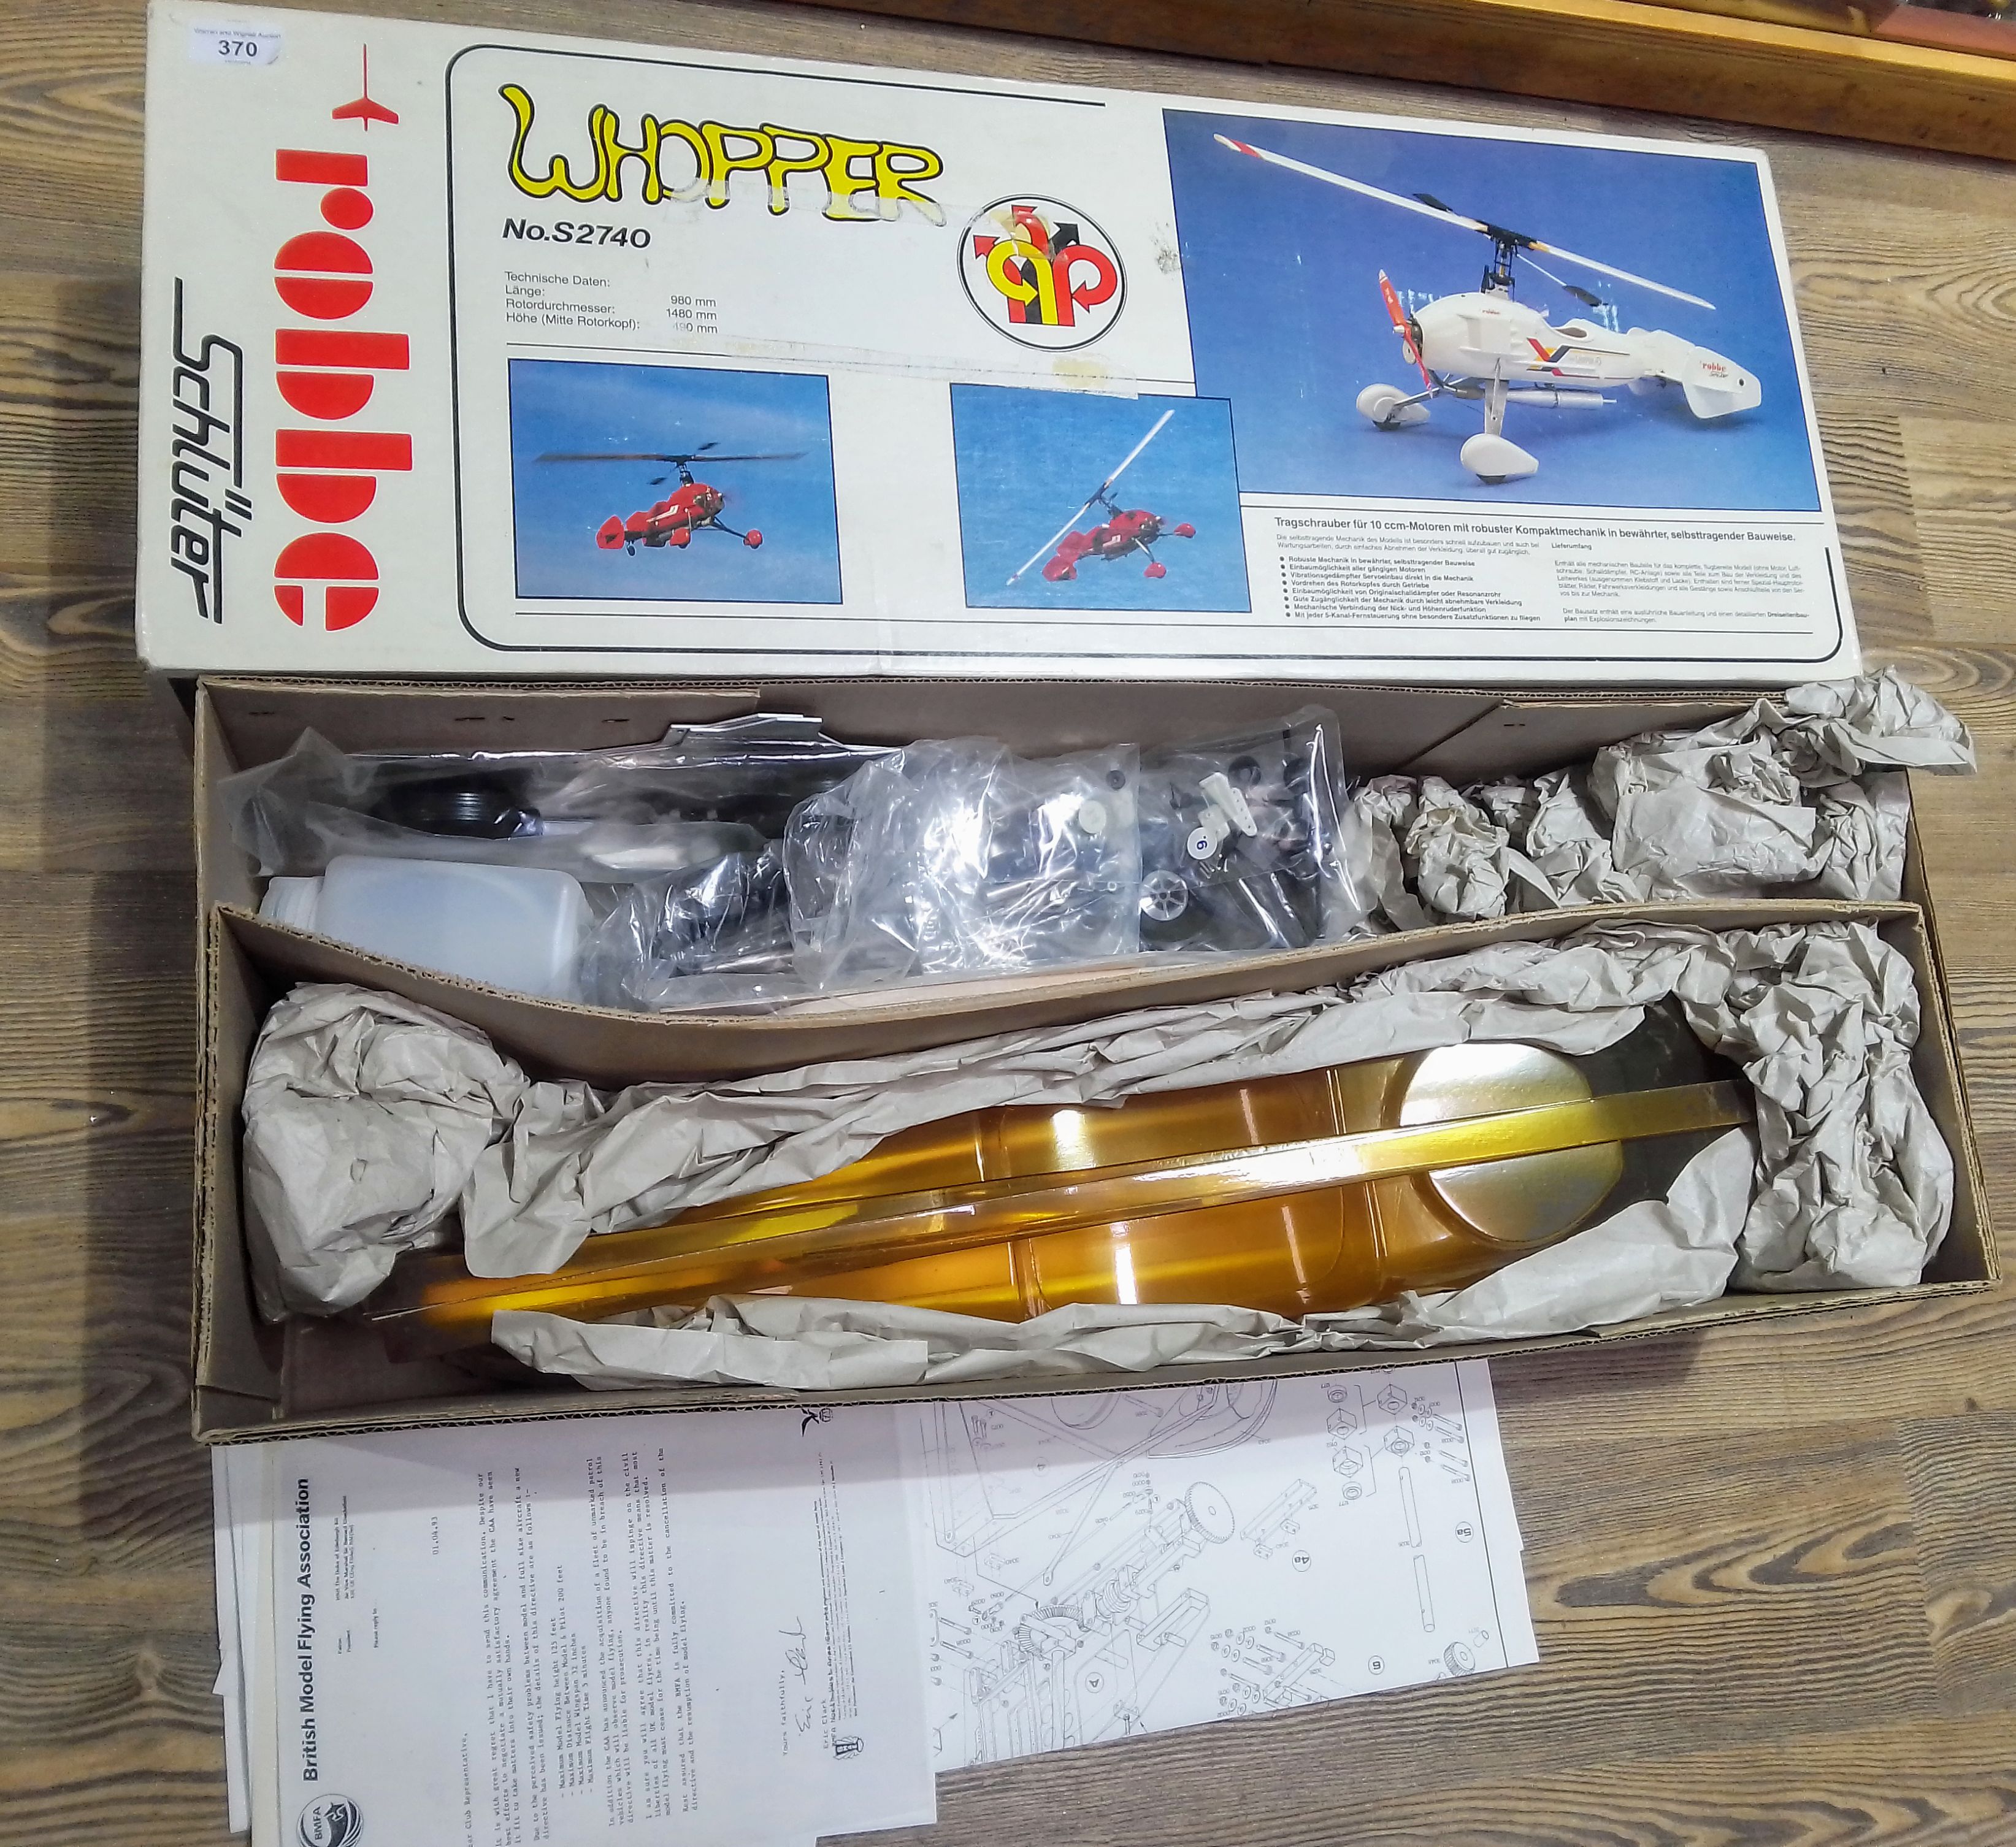 A Robbe Schluter Whopper radio control gyrocopter unbuilt kit, No.S2740 - Image 2 of 2